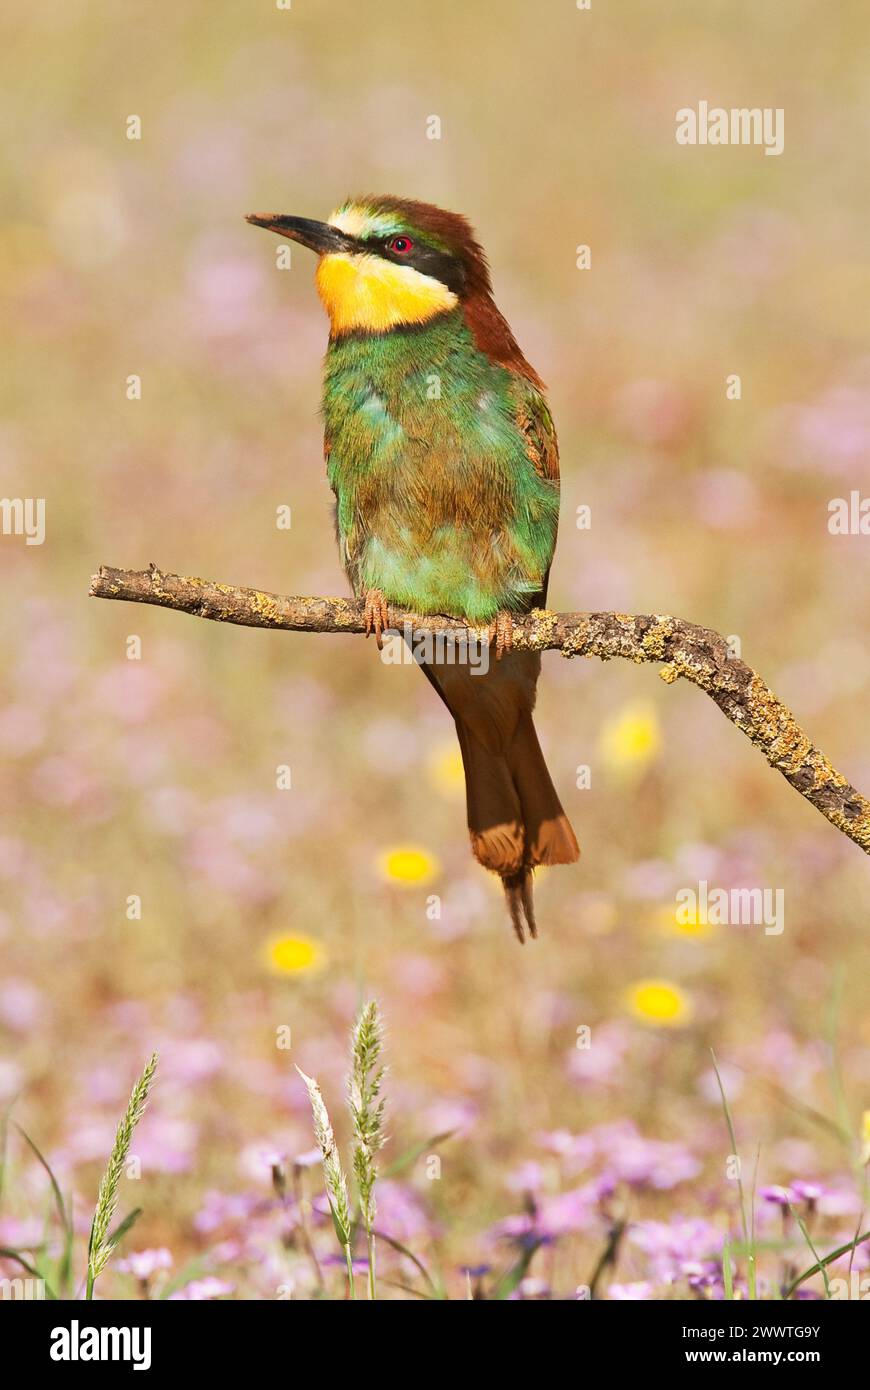 European Bee-eater (Merops apiaster) perched on branch in an open field after being digging its nest, as is clearly visible from the dust on its feet, Stock Photo